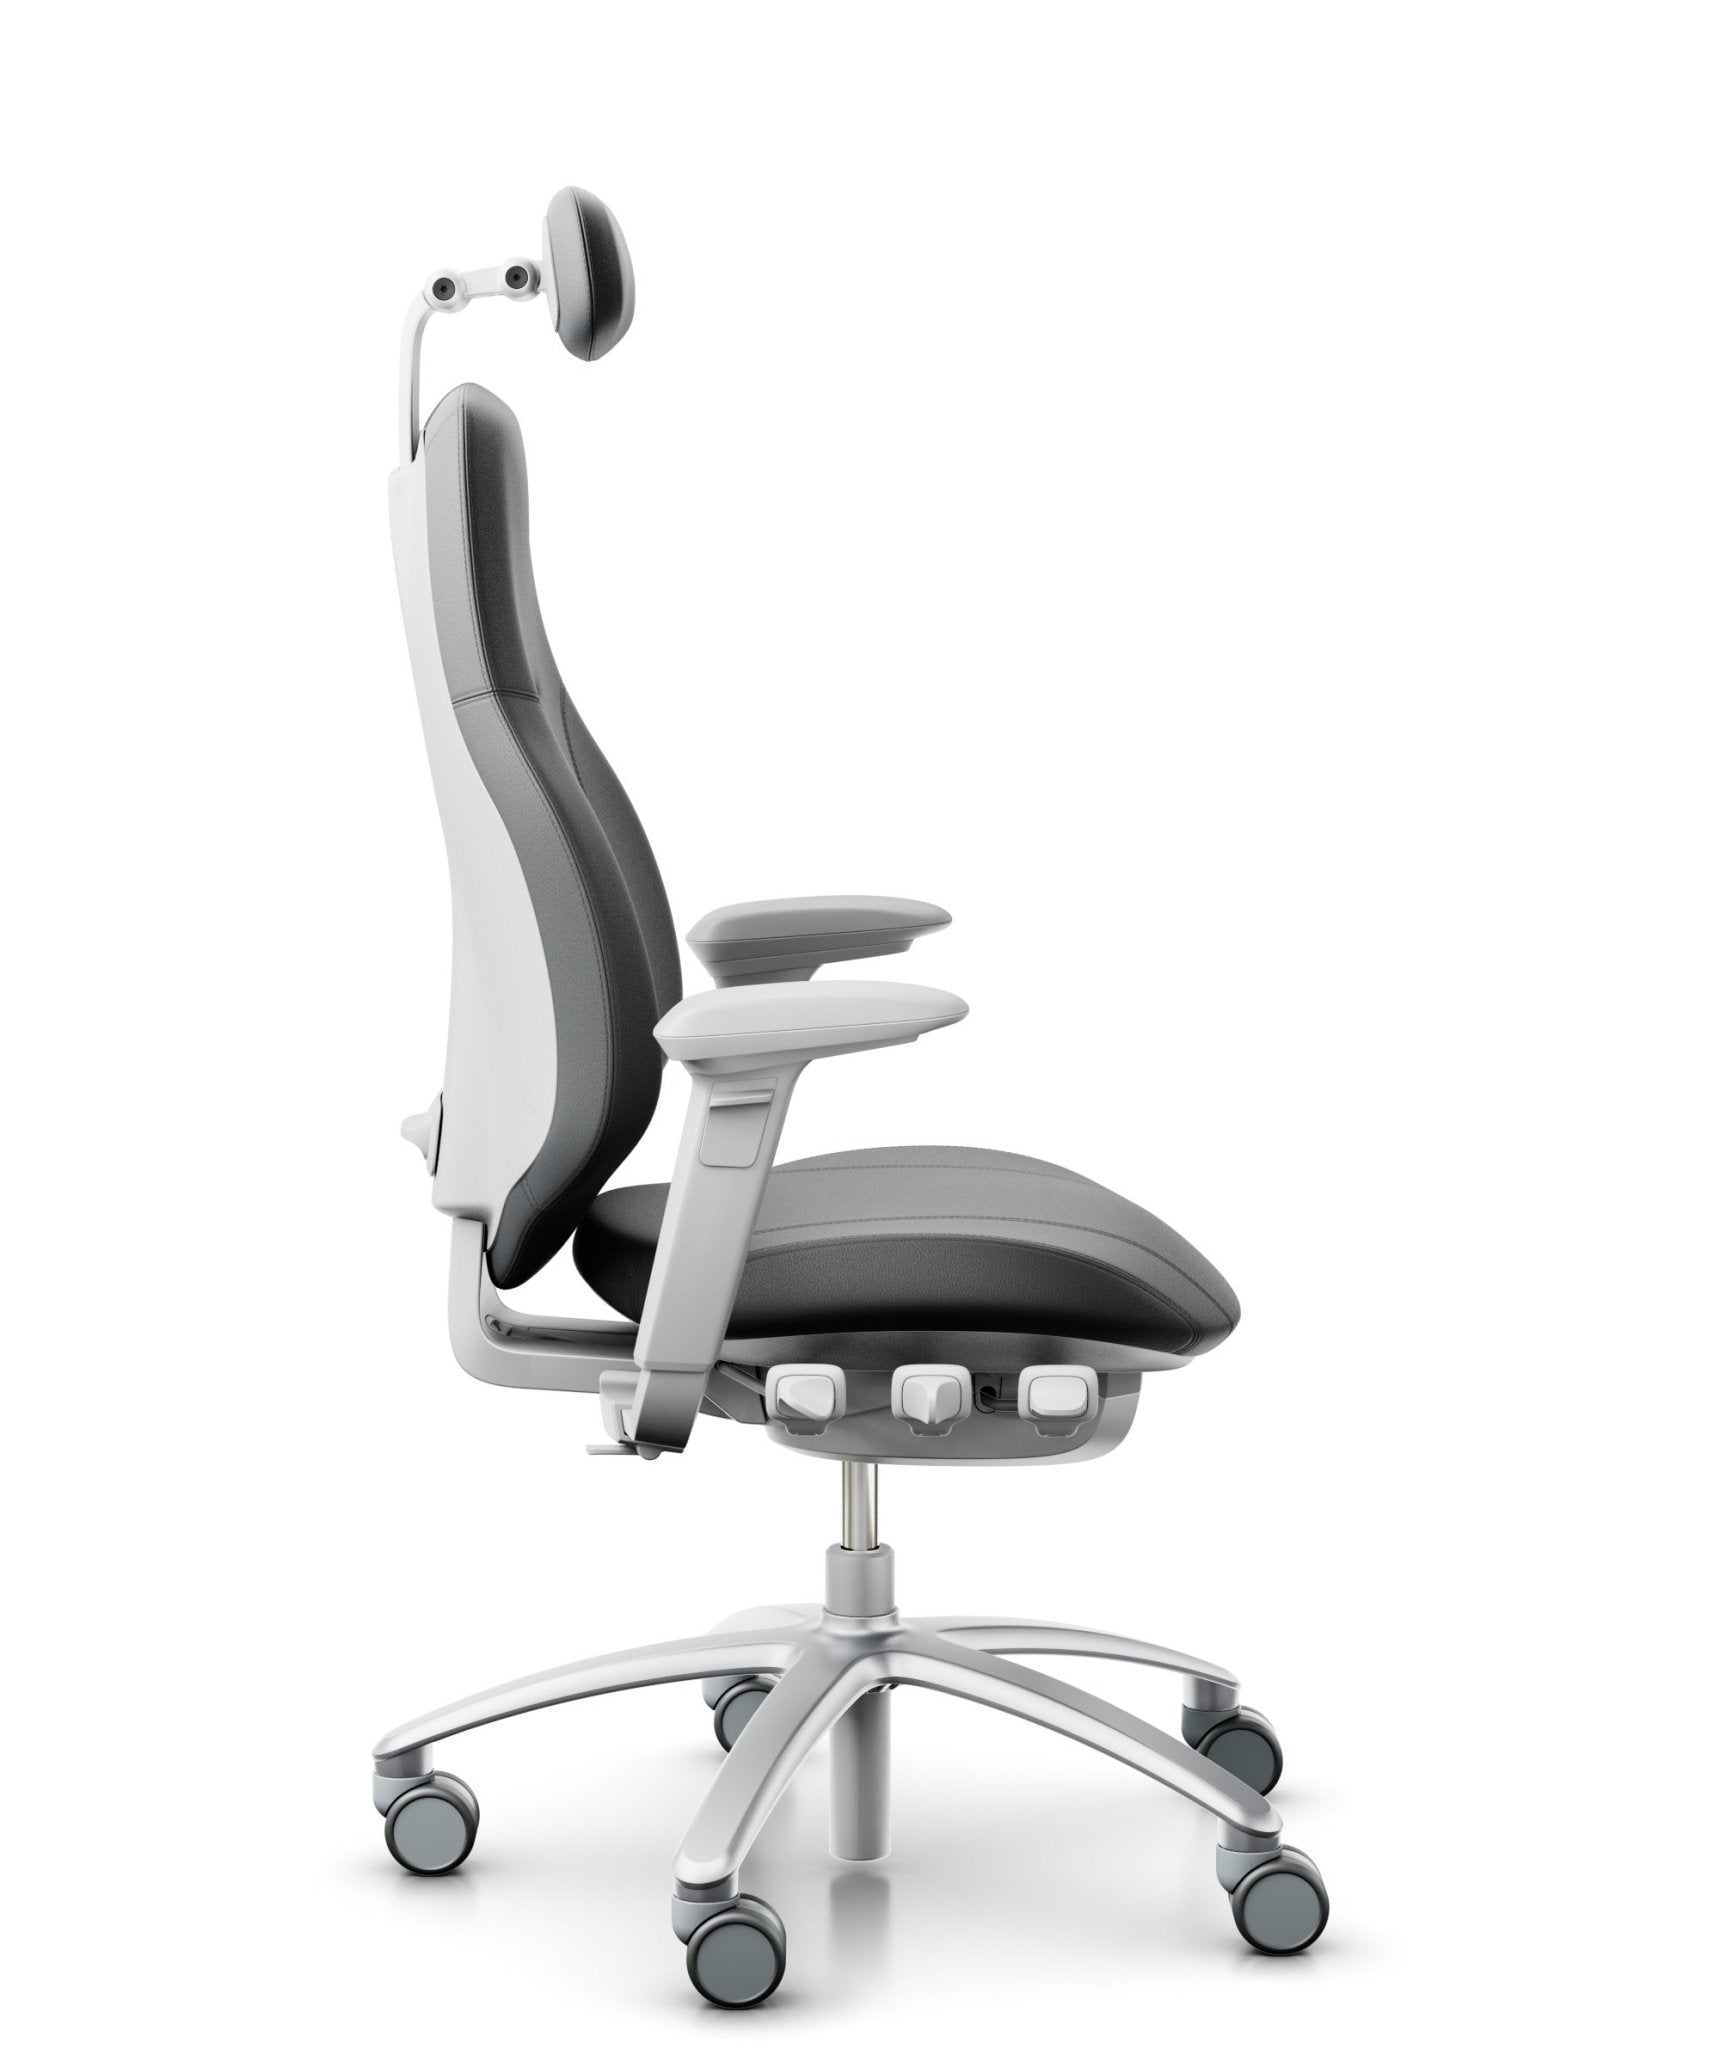 RH Mereo 220 Silver Grey Leather ergonomic office chair